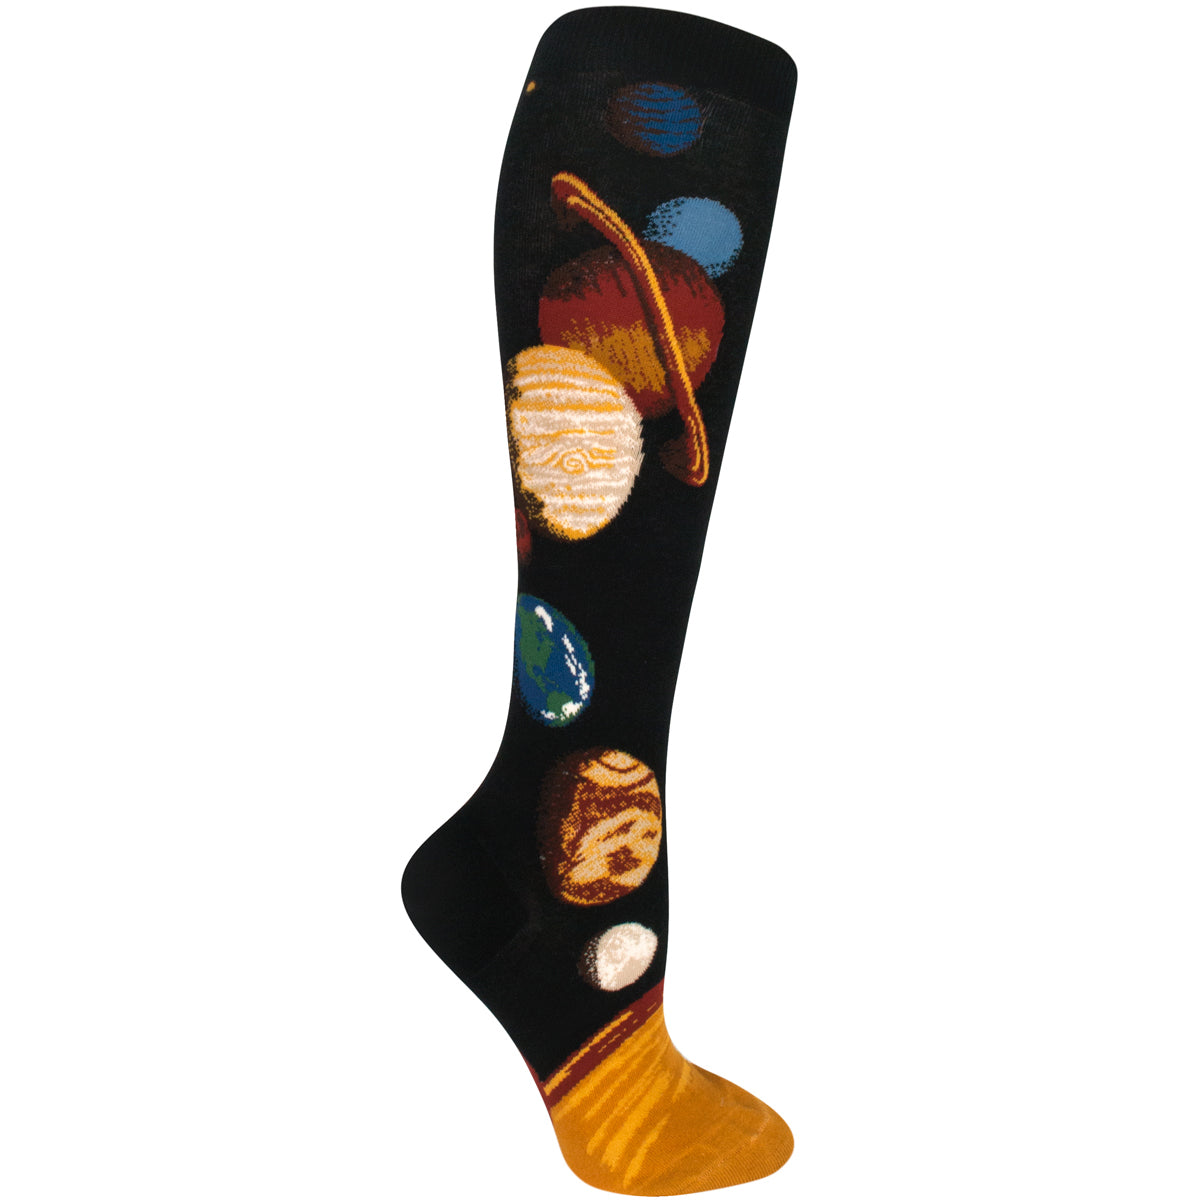 A black knee high sock with realistic planets in orbit going up the side are great for any science and astronomy fan! These solar system socks are part of our Science collection!